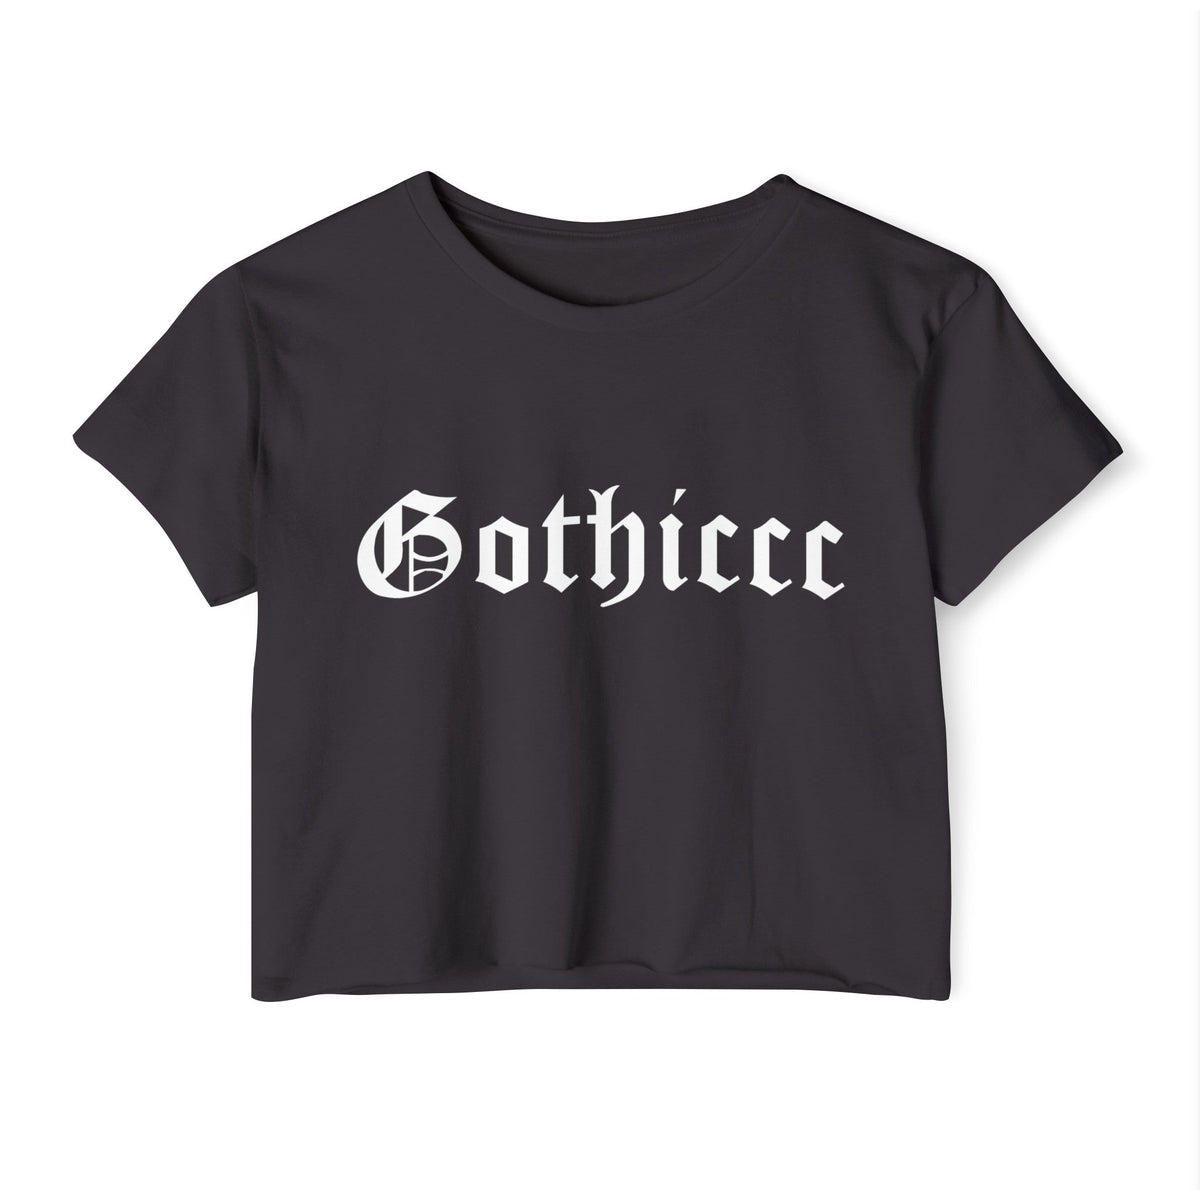 Gothiccc Women's Lightweight Crop Top - Goth Cloth Co.T - Shirt25945262330190566213